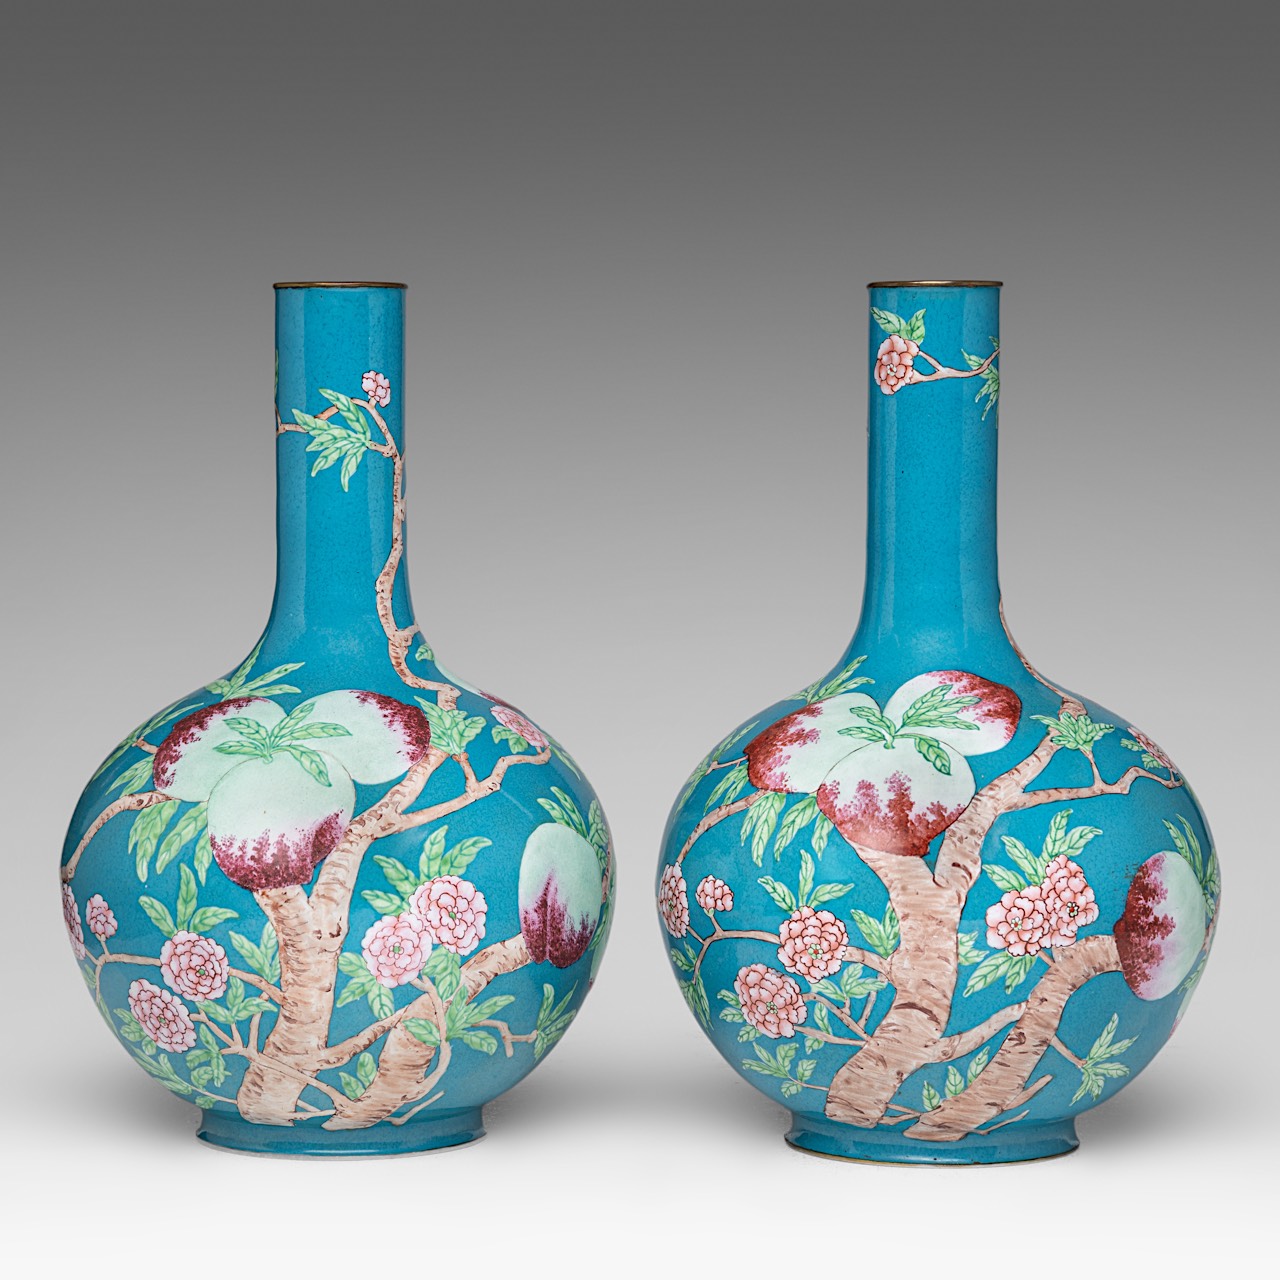 A fine pair of Chinese turquoise ground Canton enamel on copper 'Nine Peaches' bottle vases, late Qi